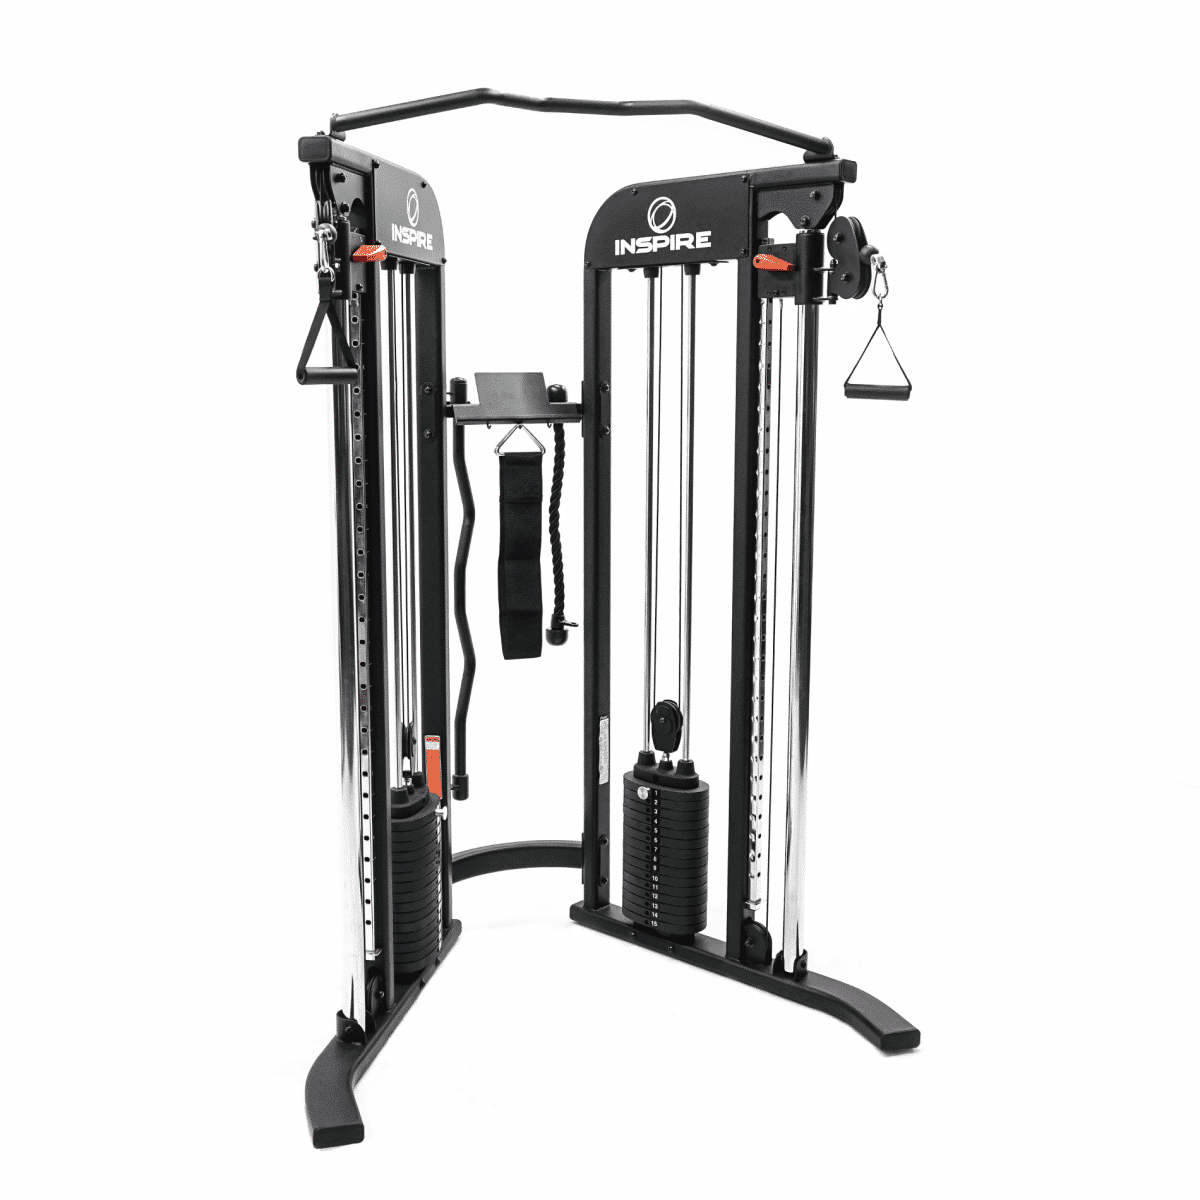 A gym machine with two pulleys and a pulley.